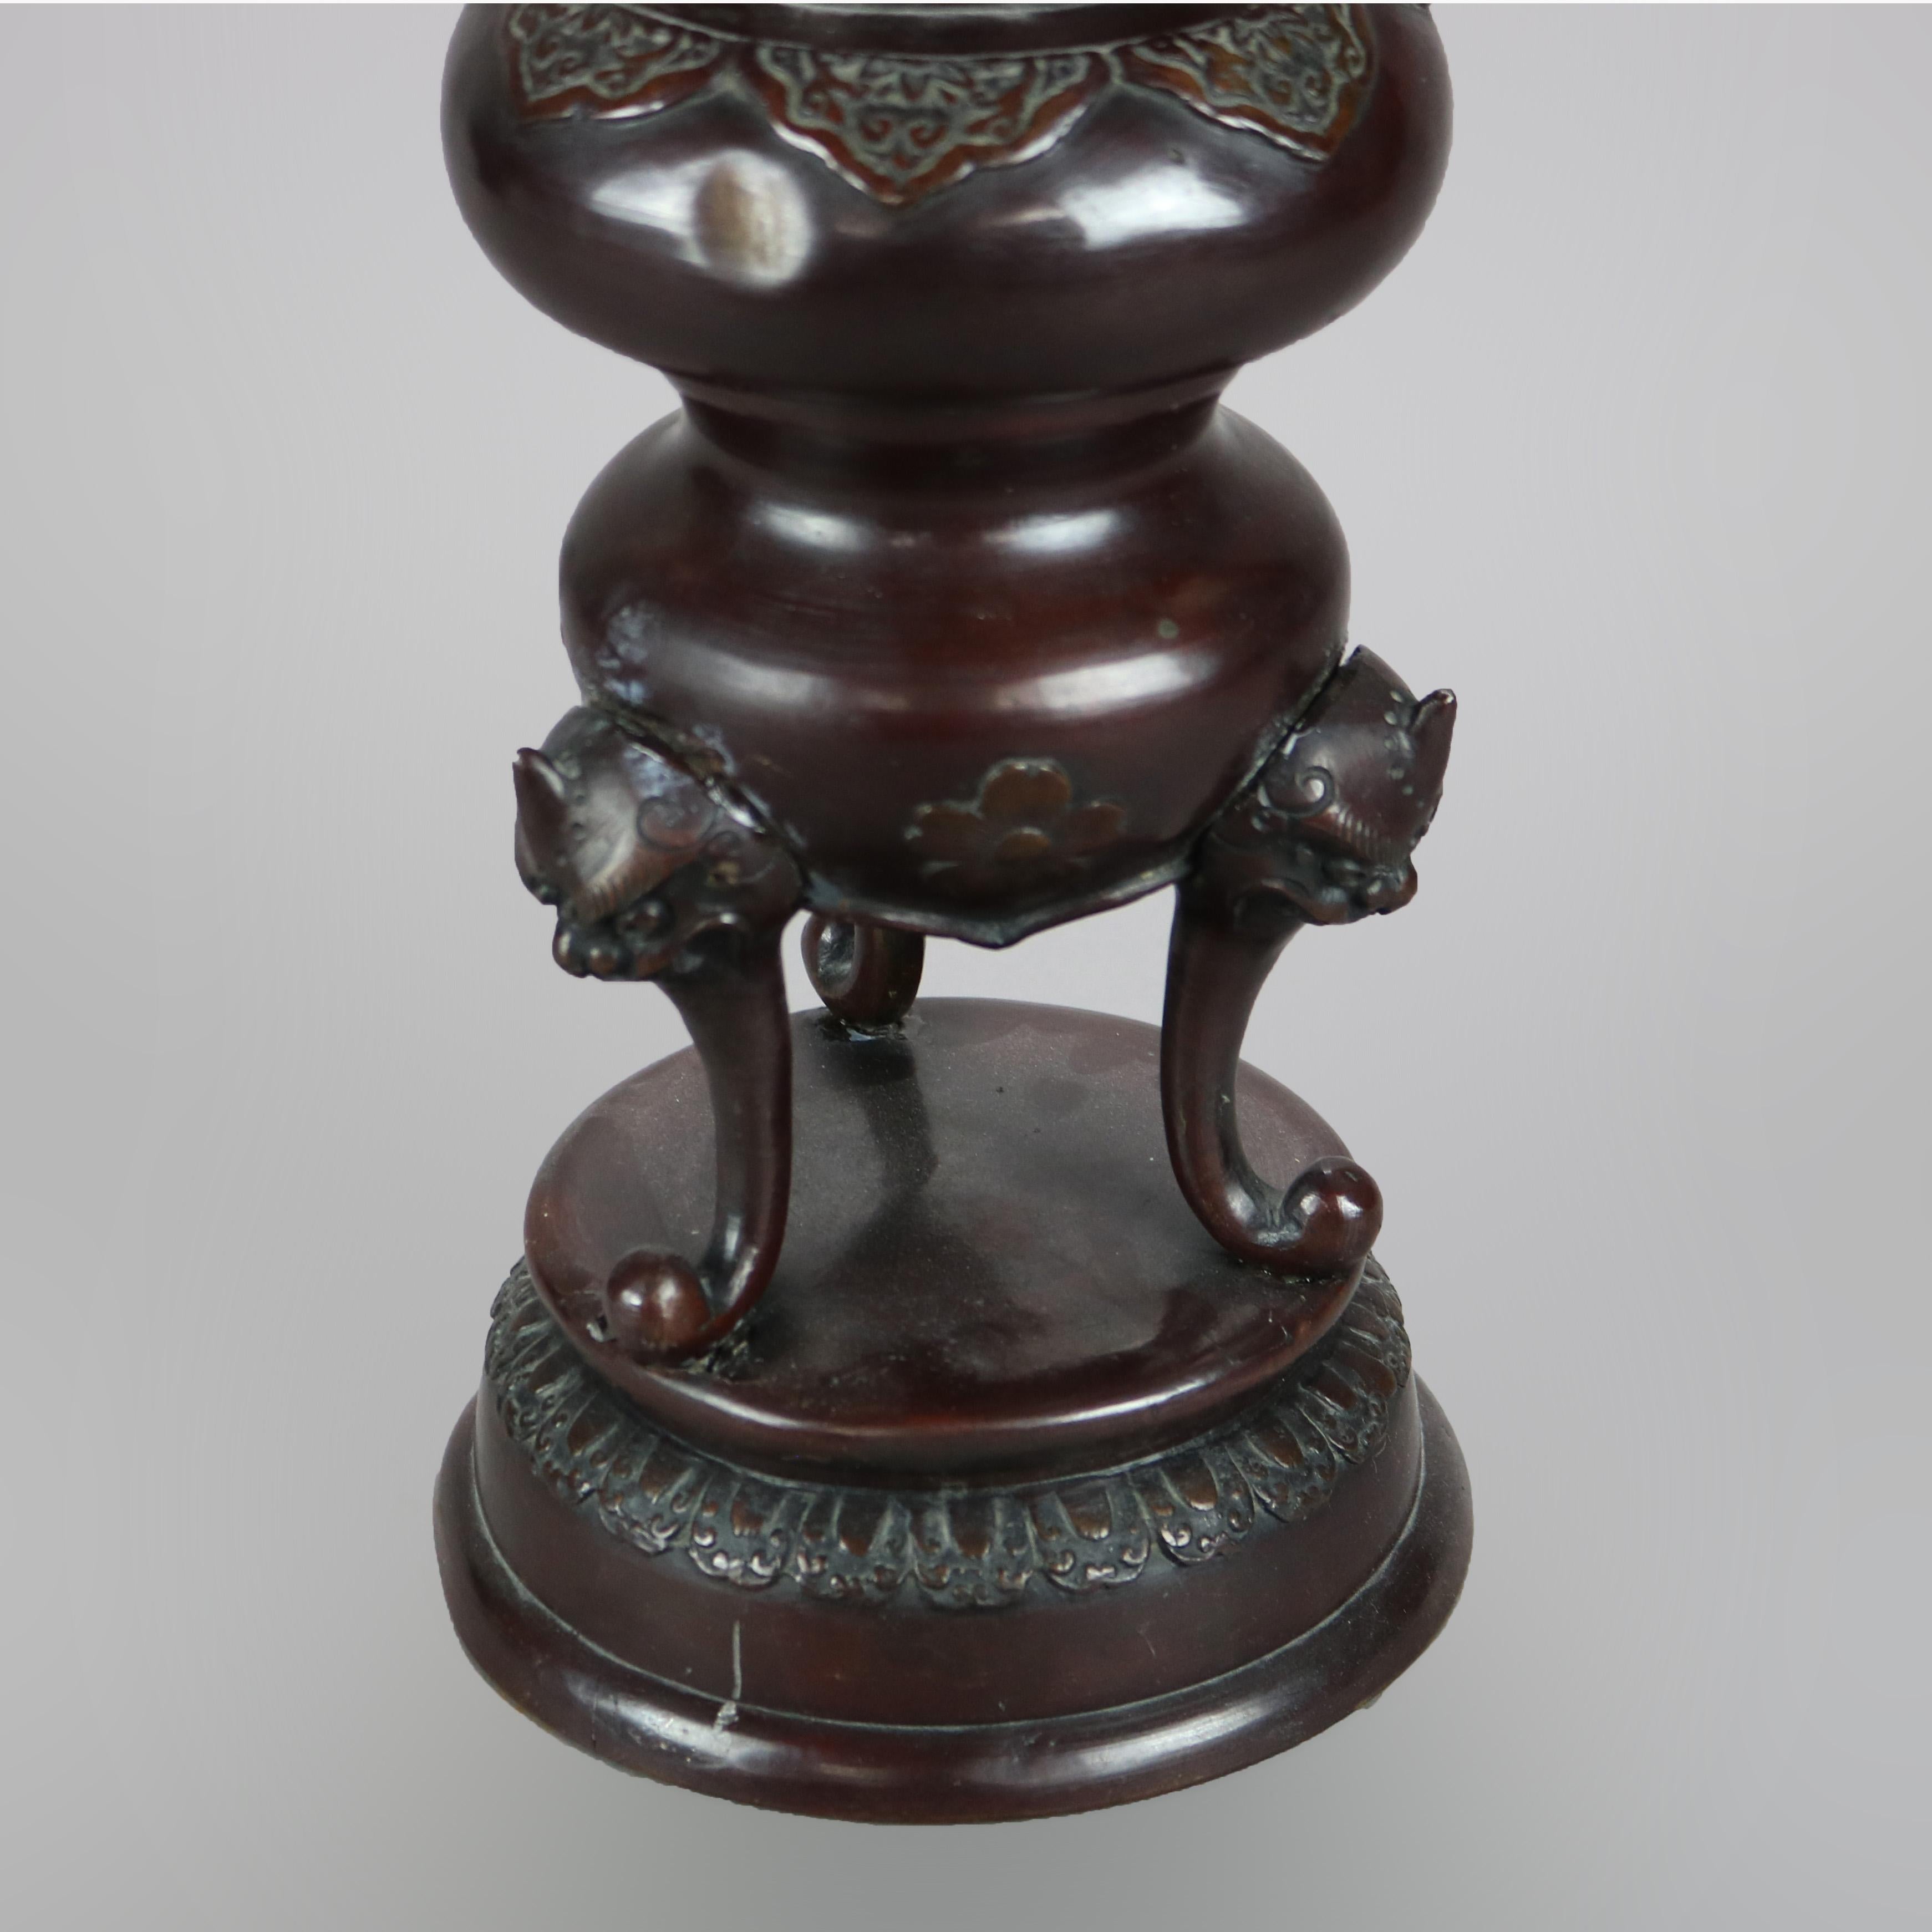 Cast Antique Japanese Bronze Meiji Footed Censer with Figural Foo Dogs & Birds, 1900 For Sale